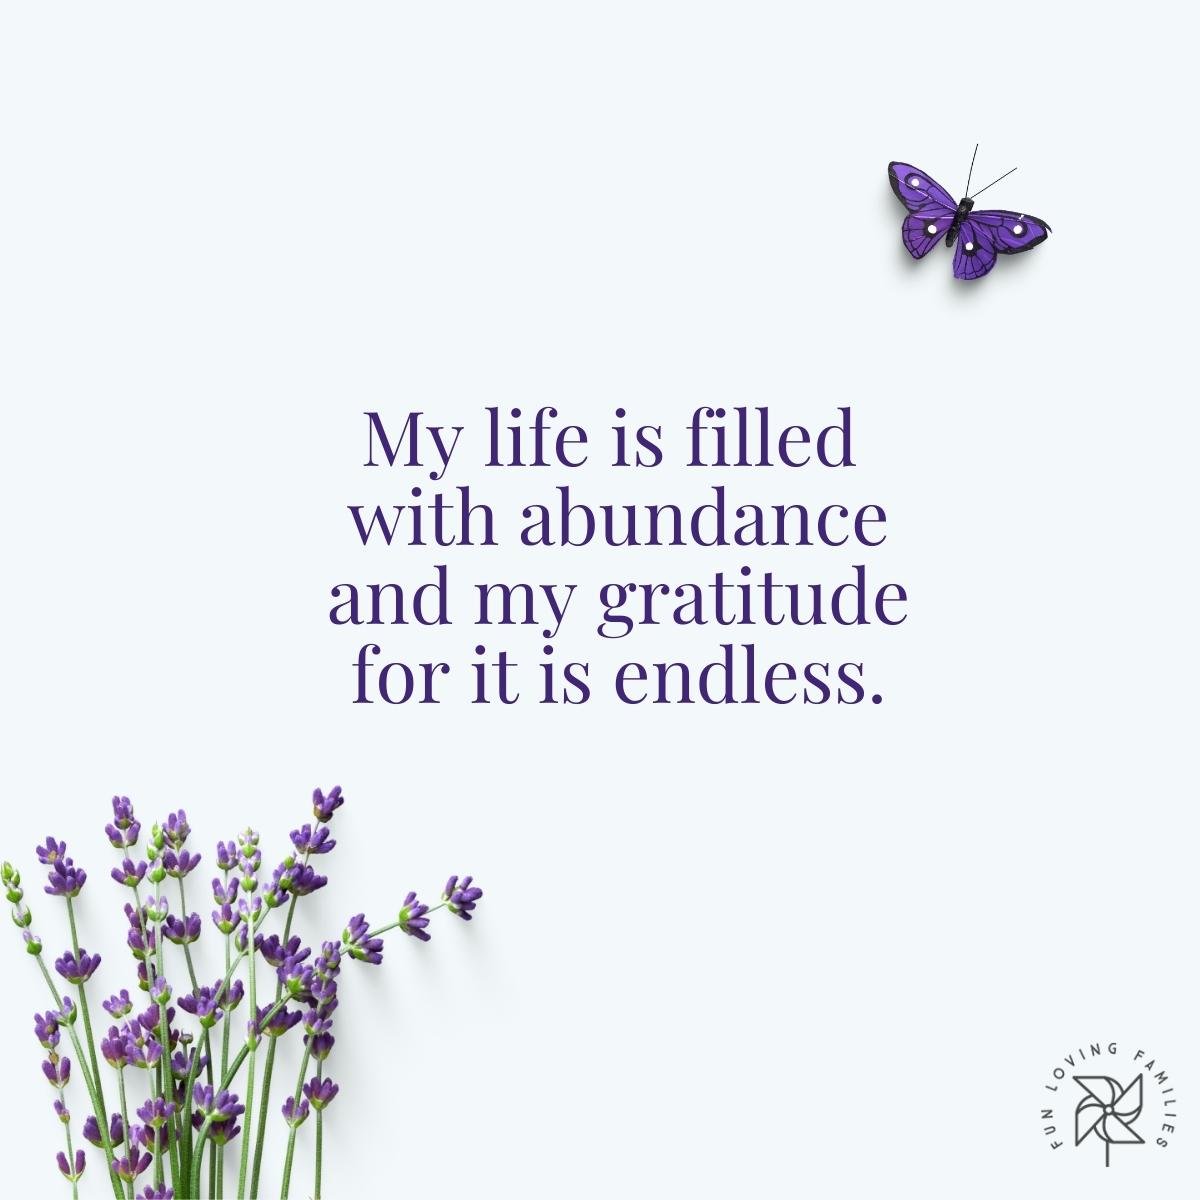 My life is filled with abundance and my gratitude for it is endless affirmation